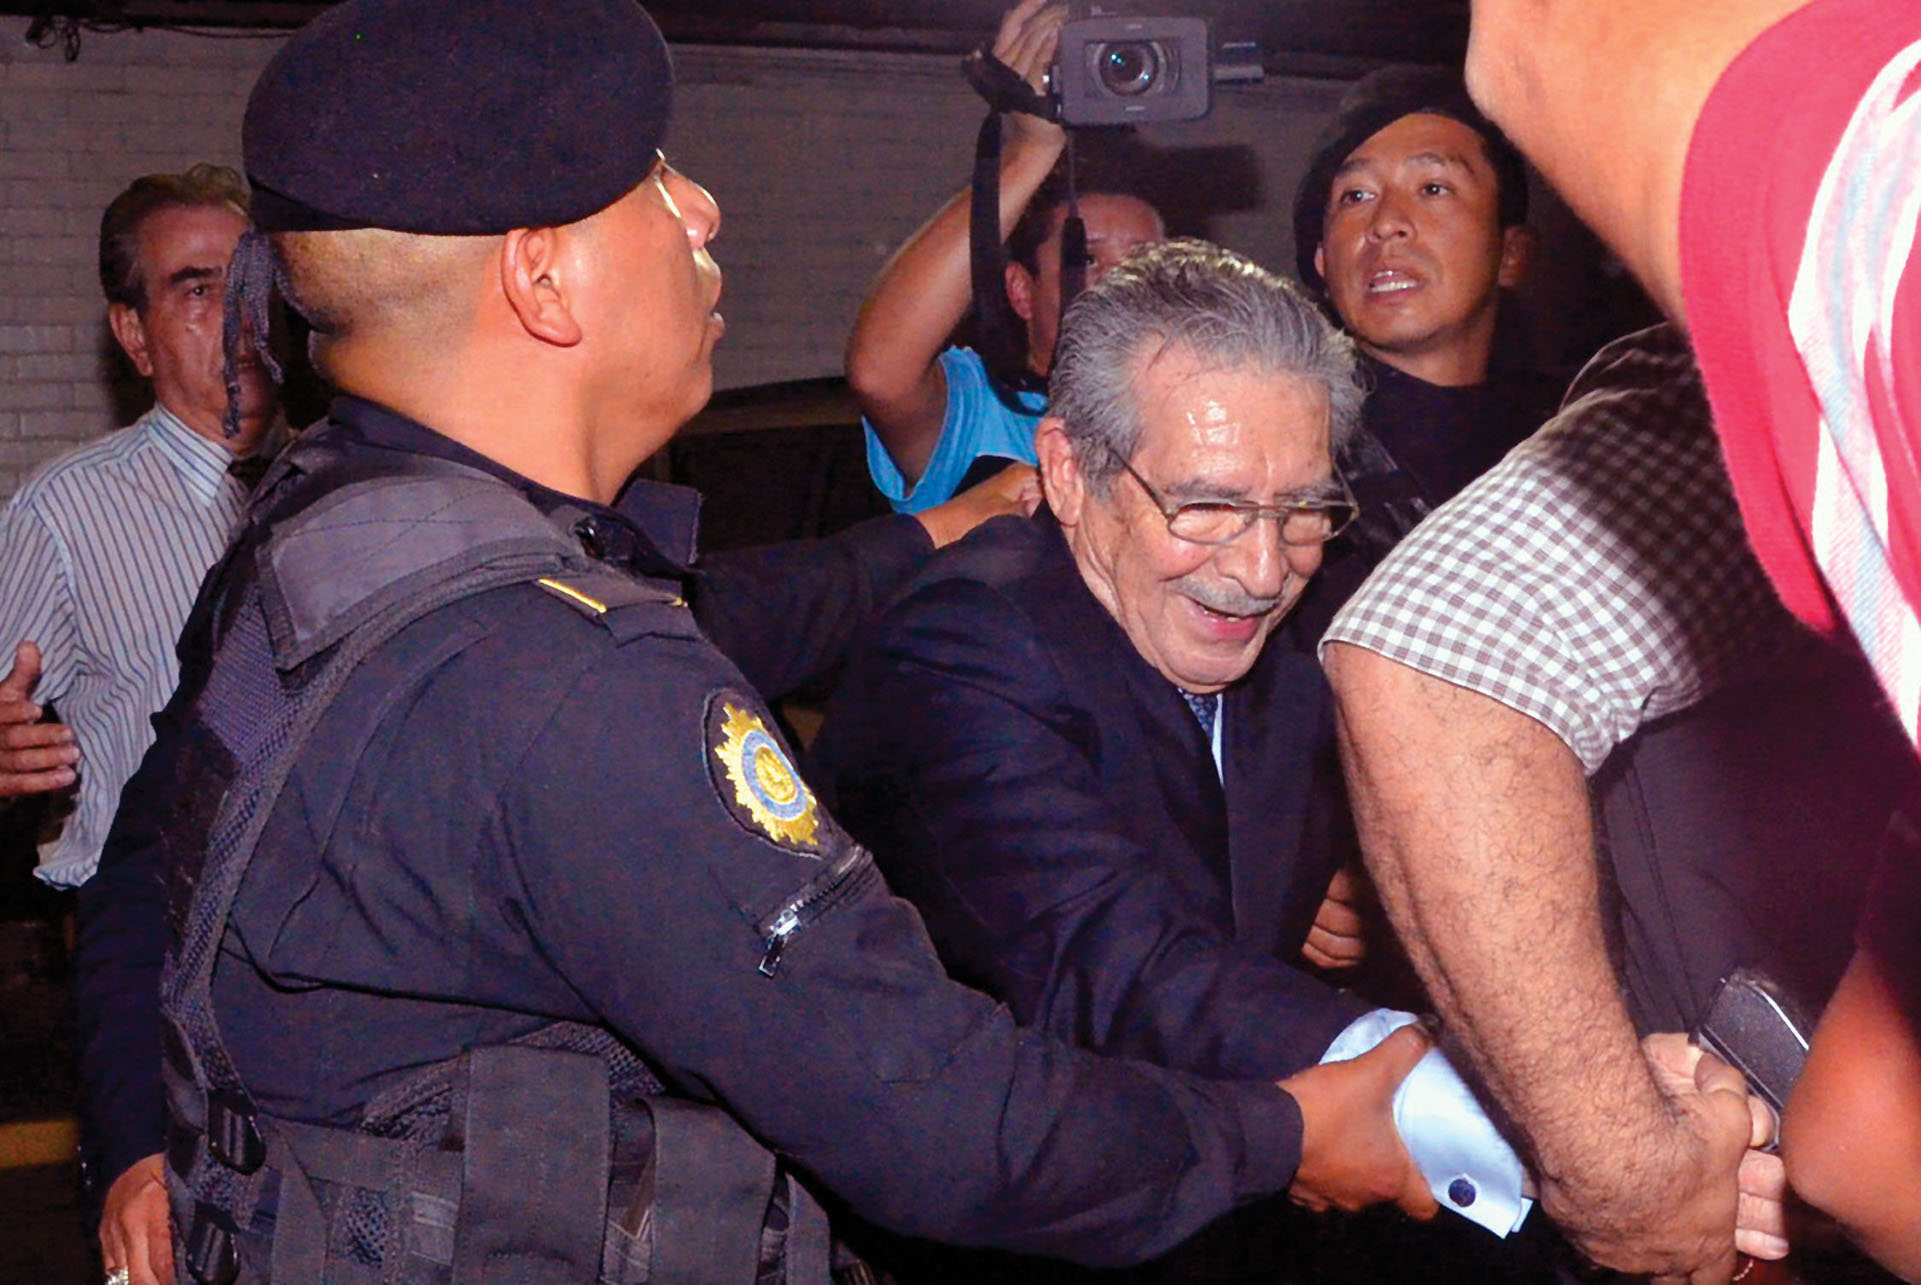 Former dictator Efraín Rios Montt is led away in handcuffs by Guatemalan police following his conviction. (Photo by José Anotnio Castro.)